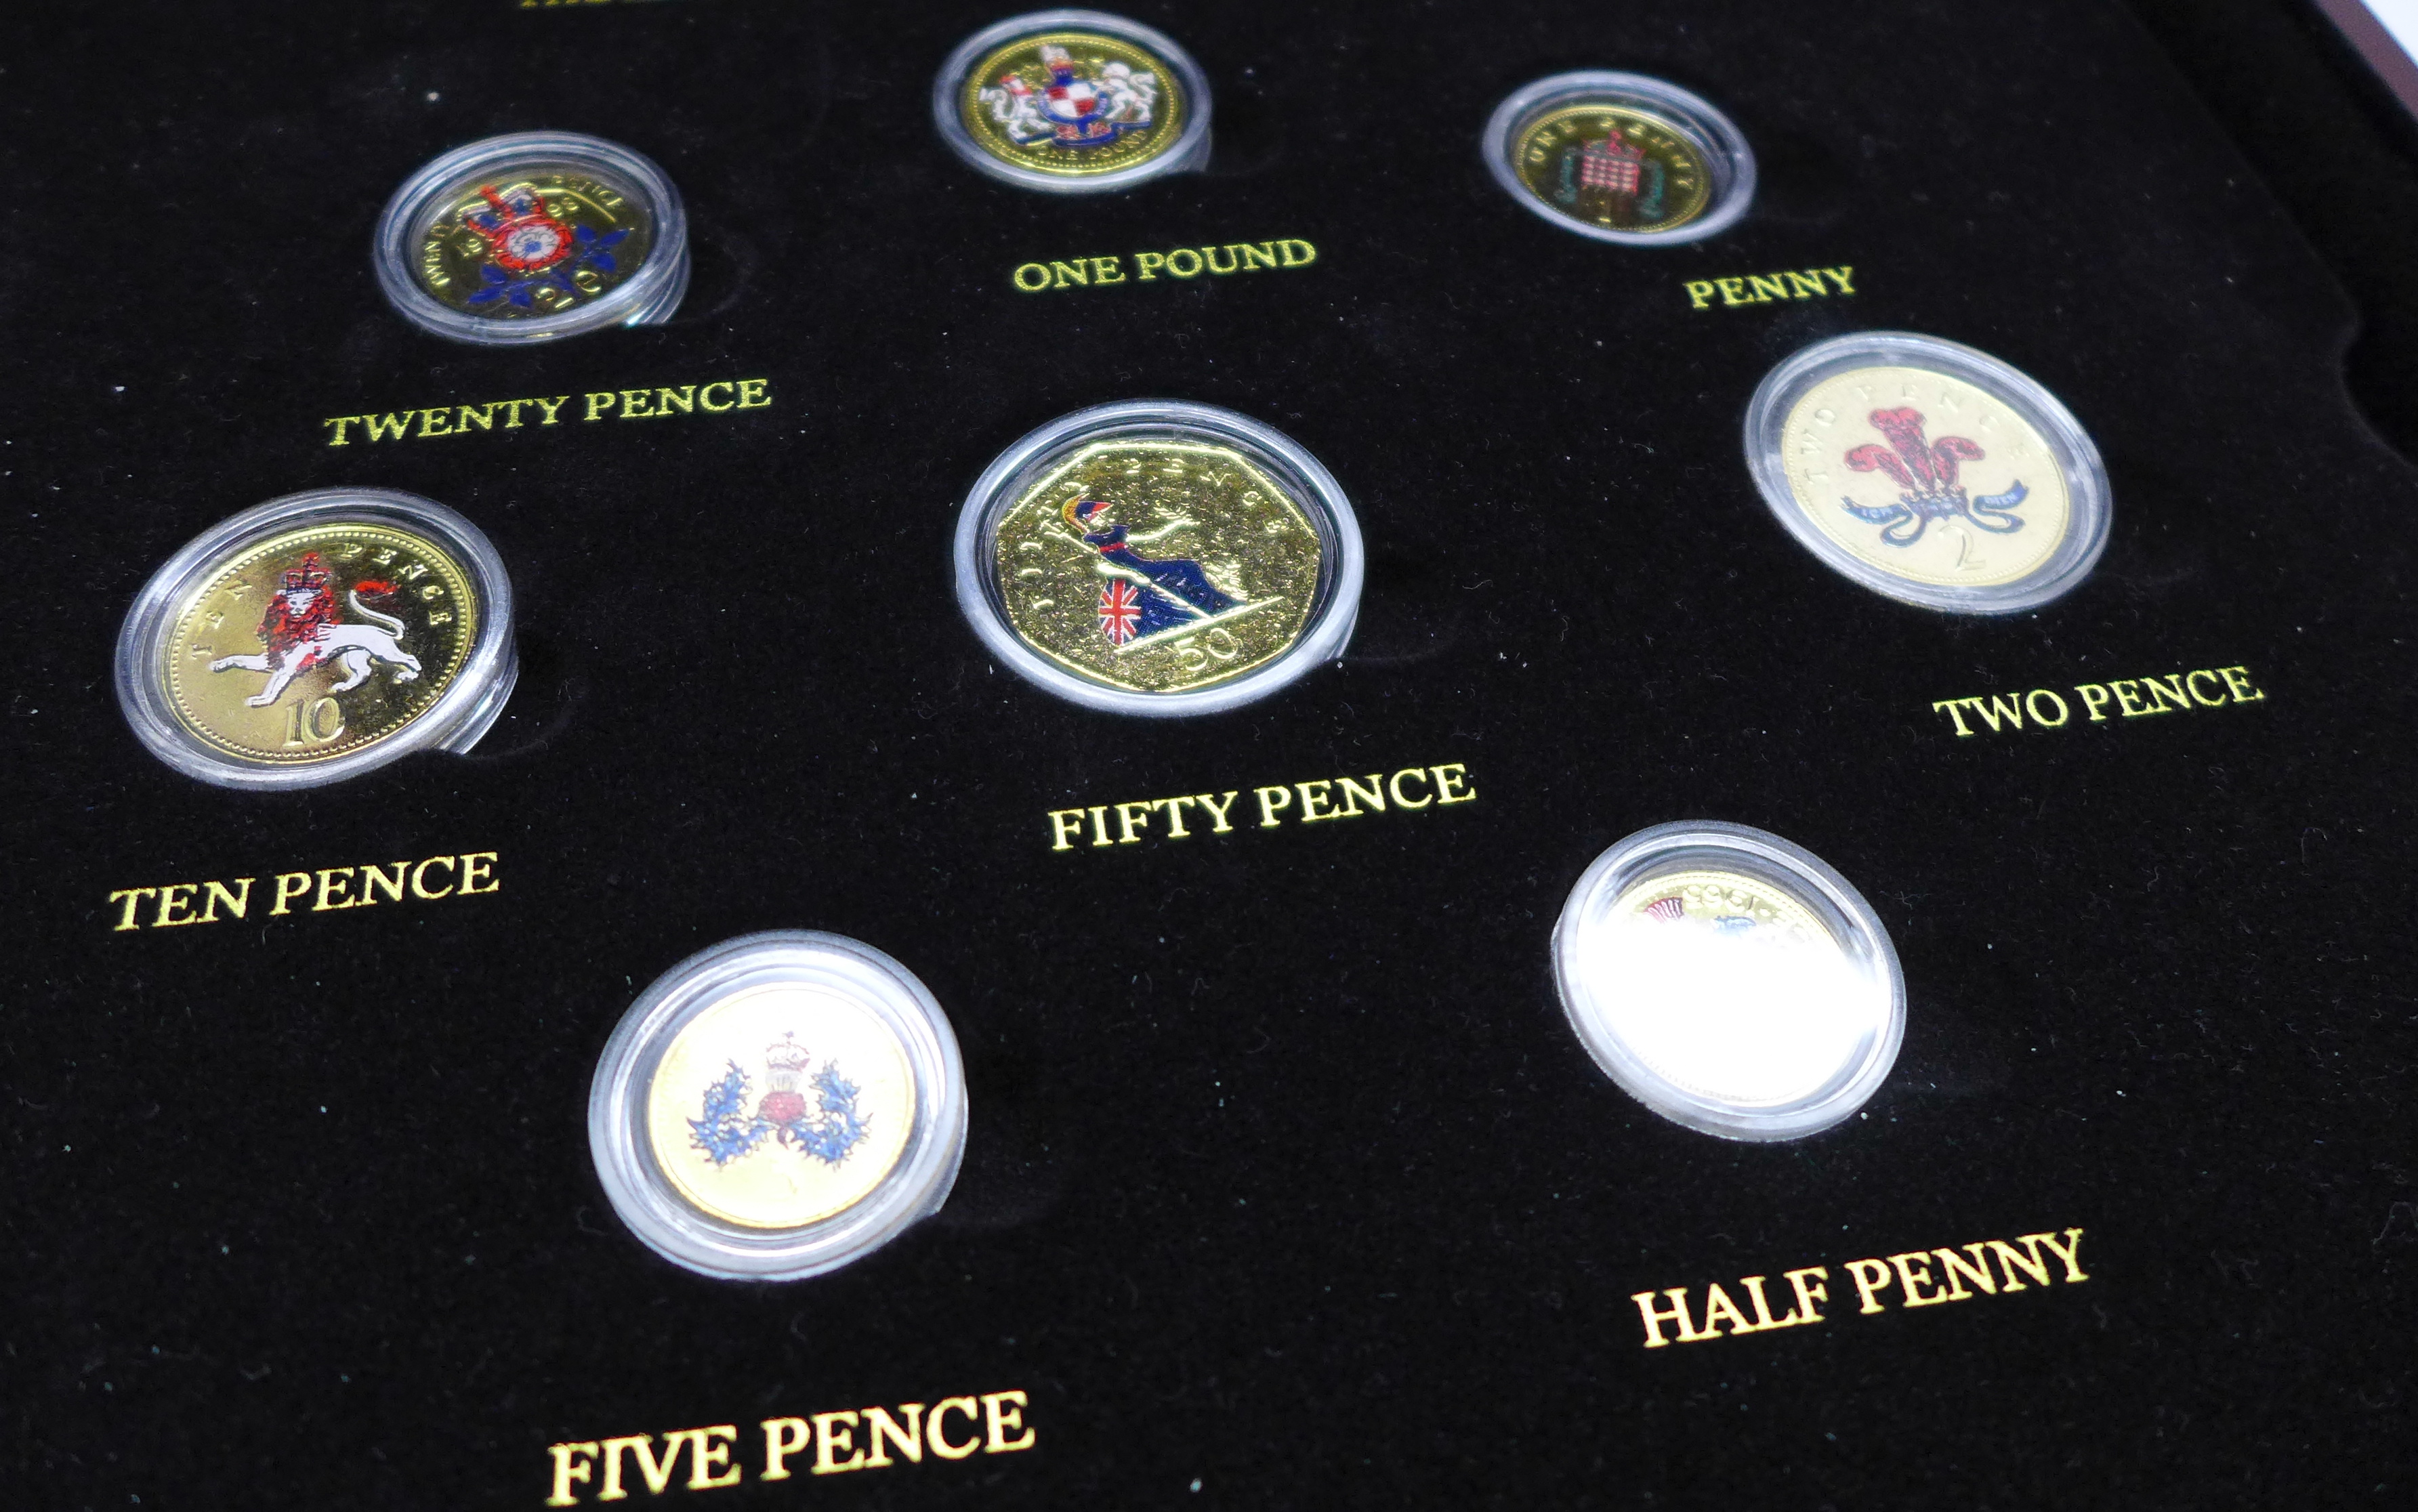 The changing face of British coinage, a set of The Emblem series decimals of Elizabeth II and a - Bild 5 aus 7